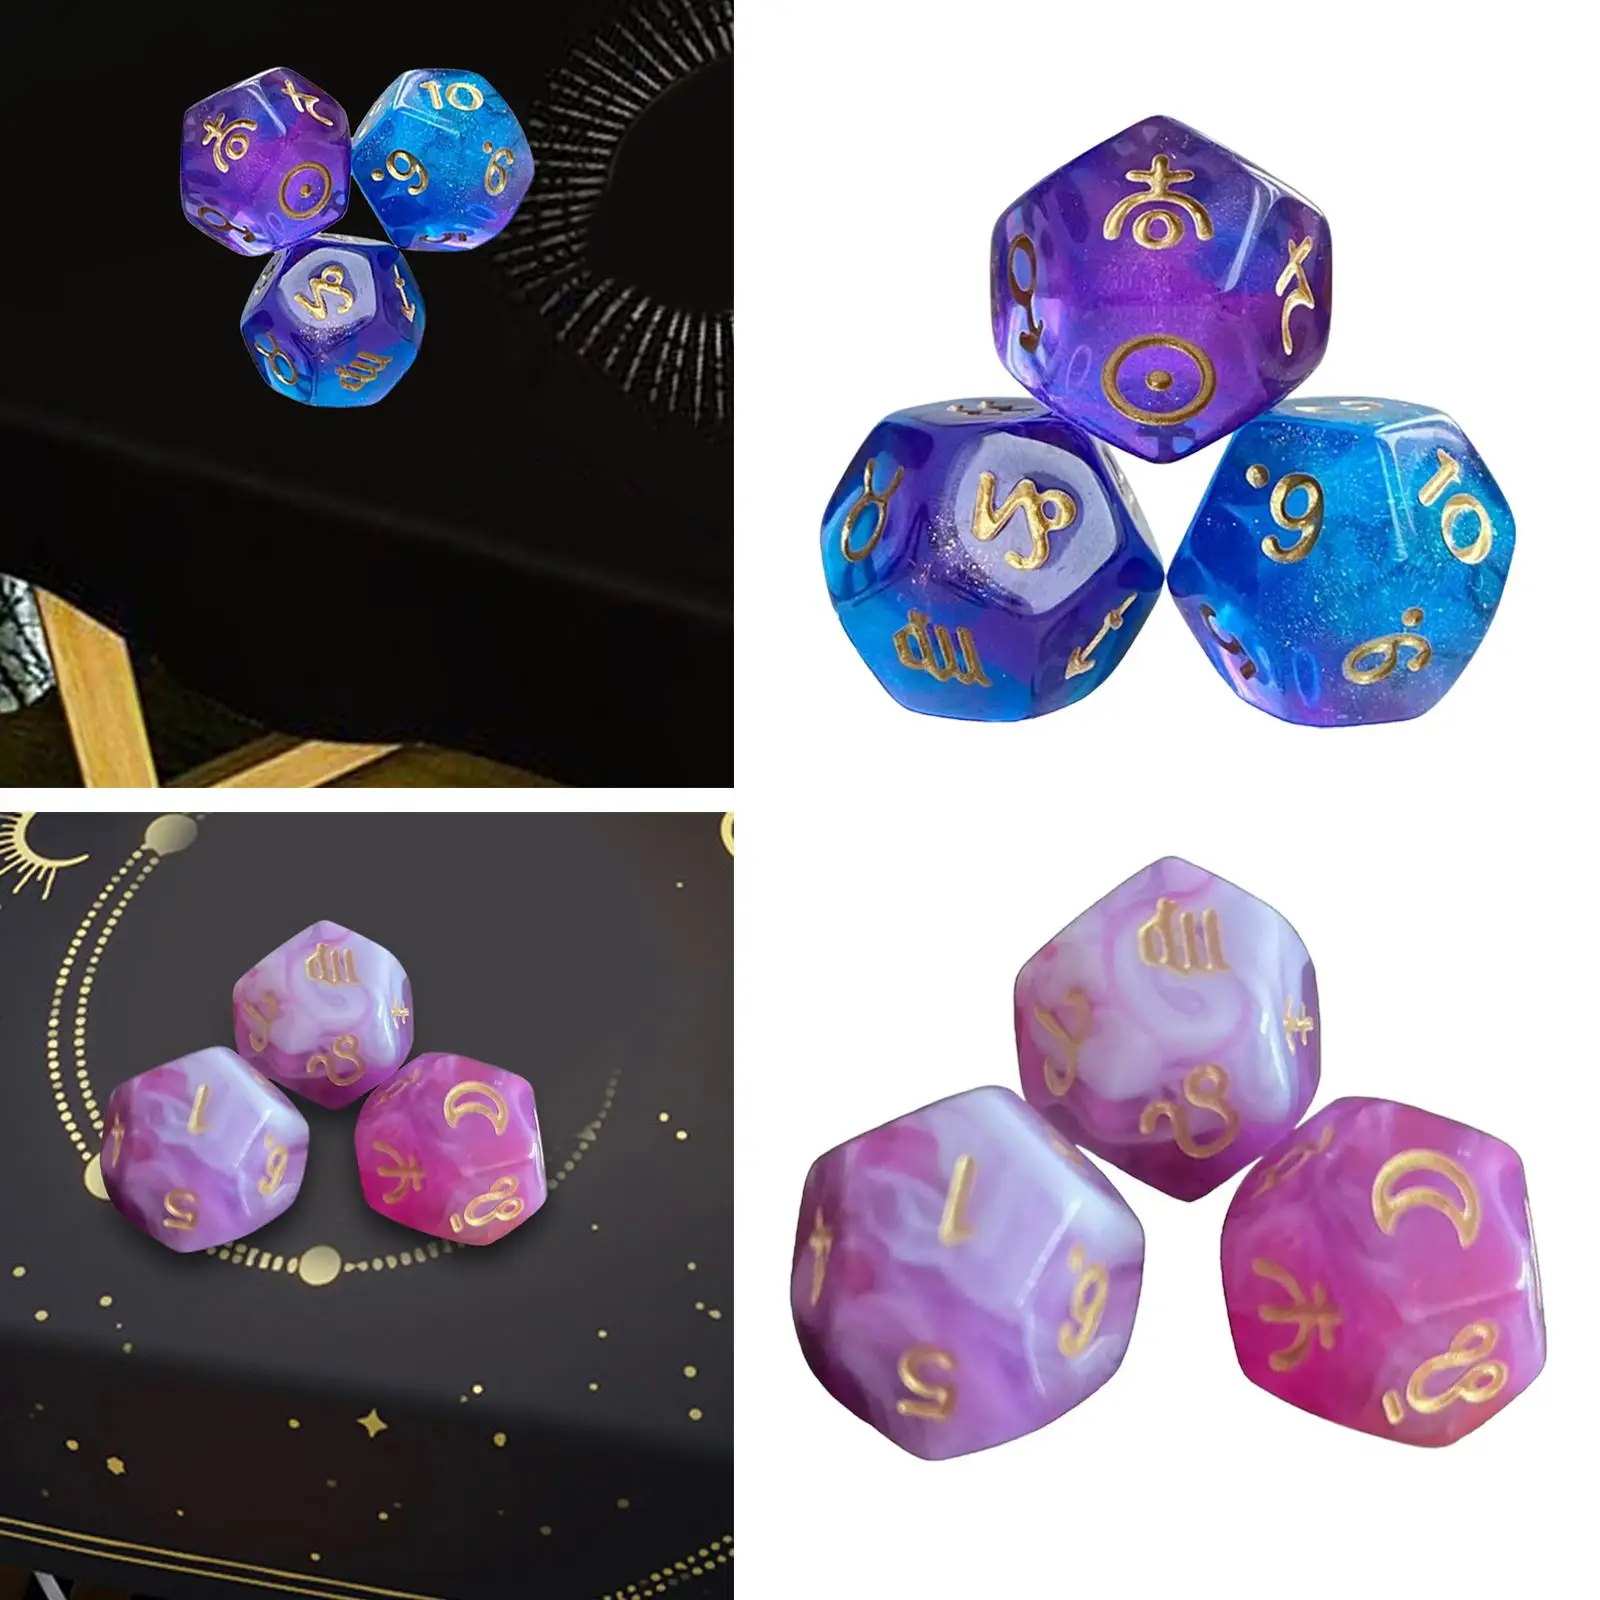 3x Astrology Signs Dice Board Game Dice Set Constellation Dices Acrylic D12 Dice Set, 1.4cm